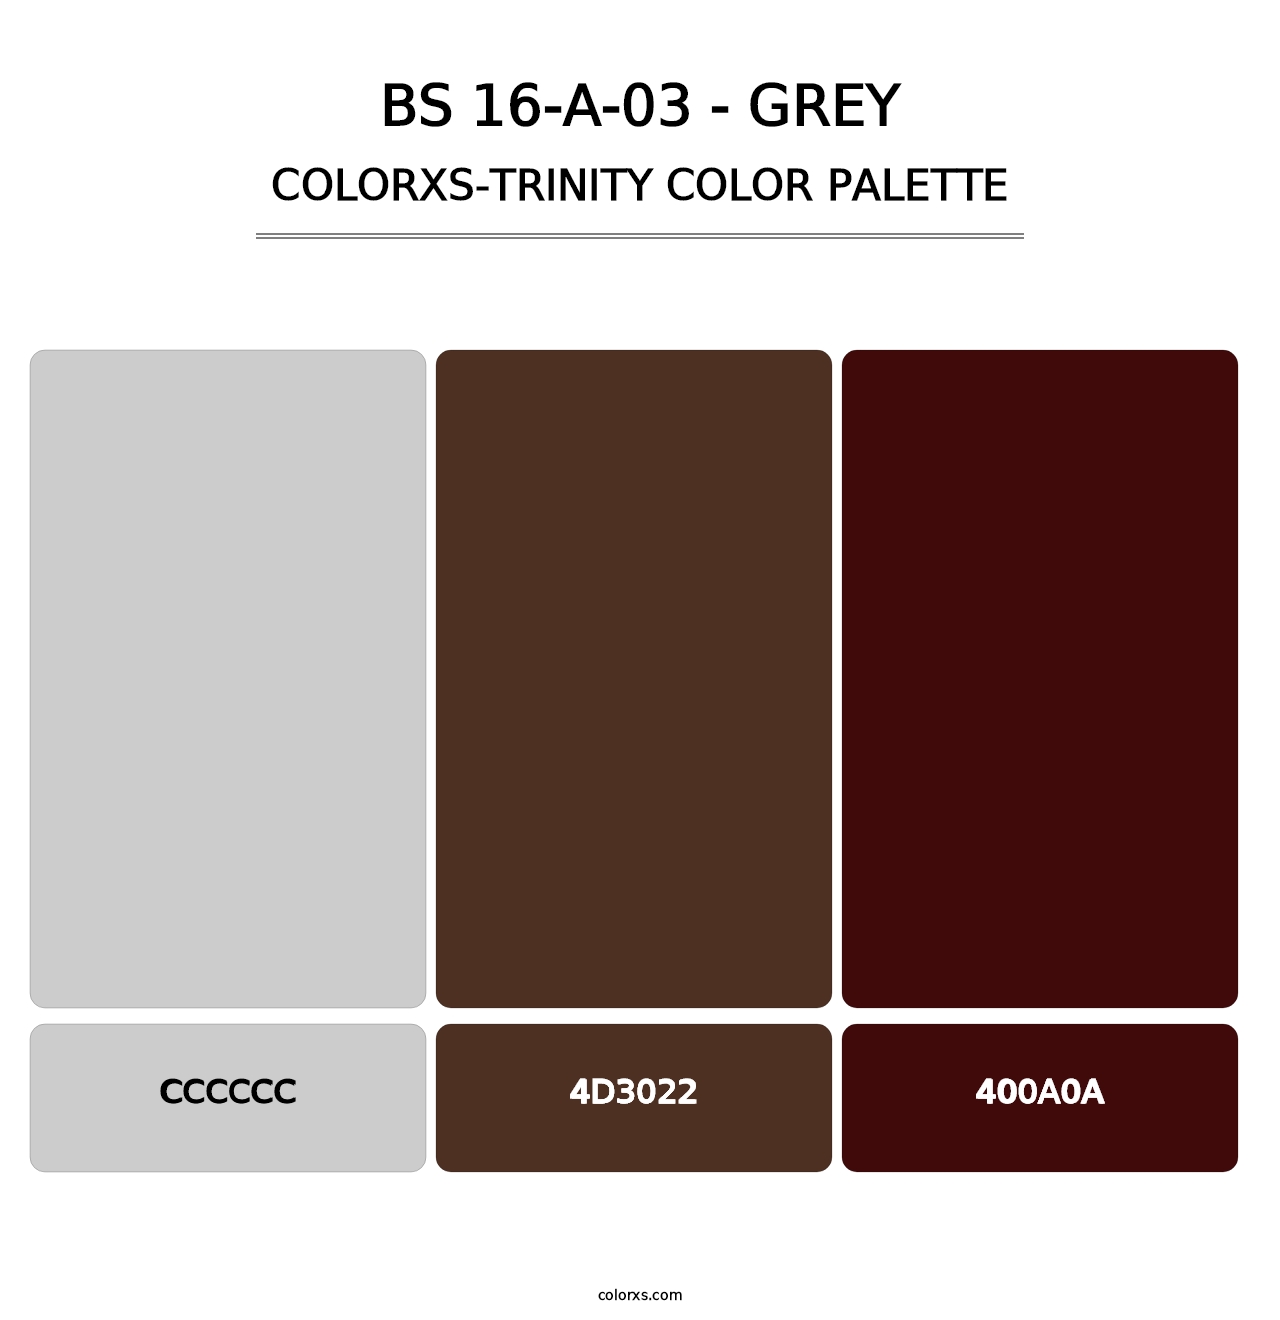 BS 16-A-03 - Grey - Colorxs Trinity Palette